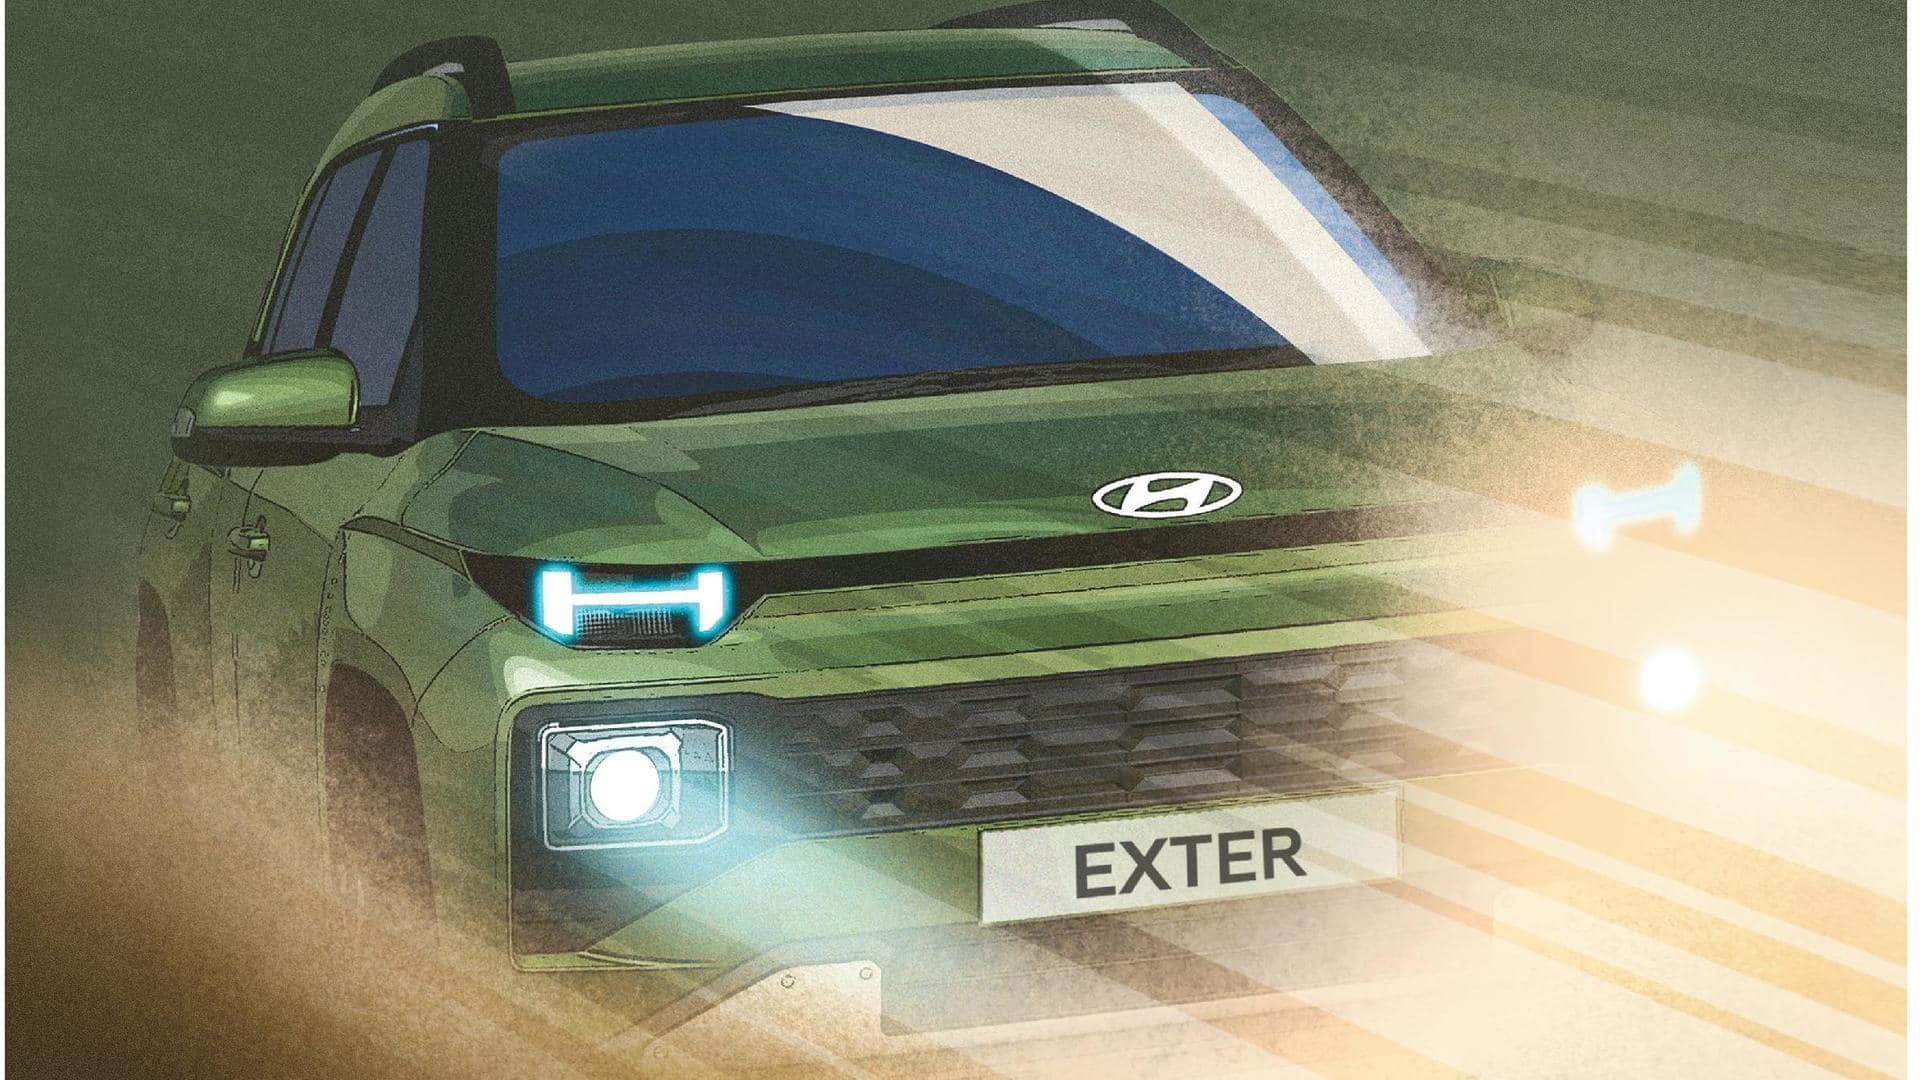 What to expect from 2023 Hyundai EXTER micro-SUV